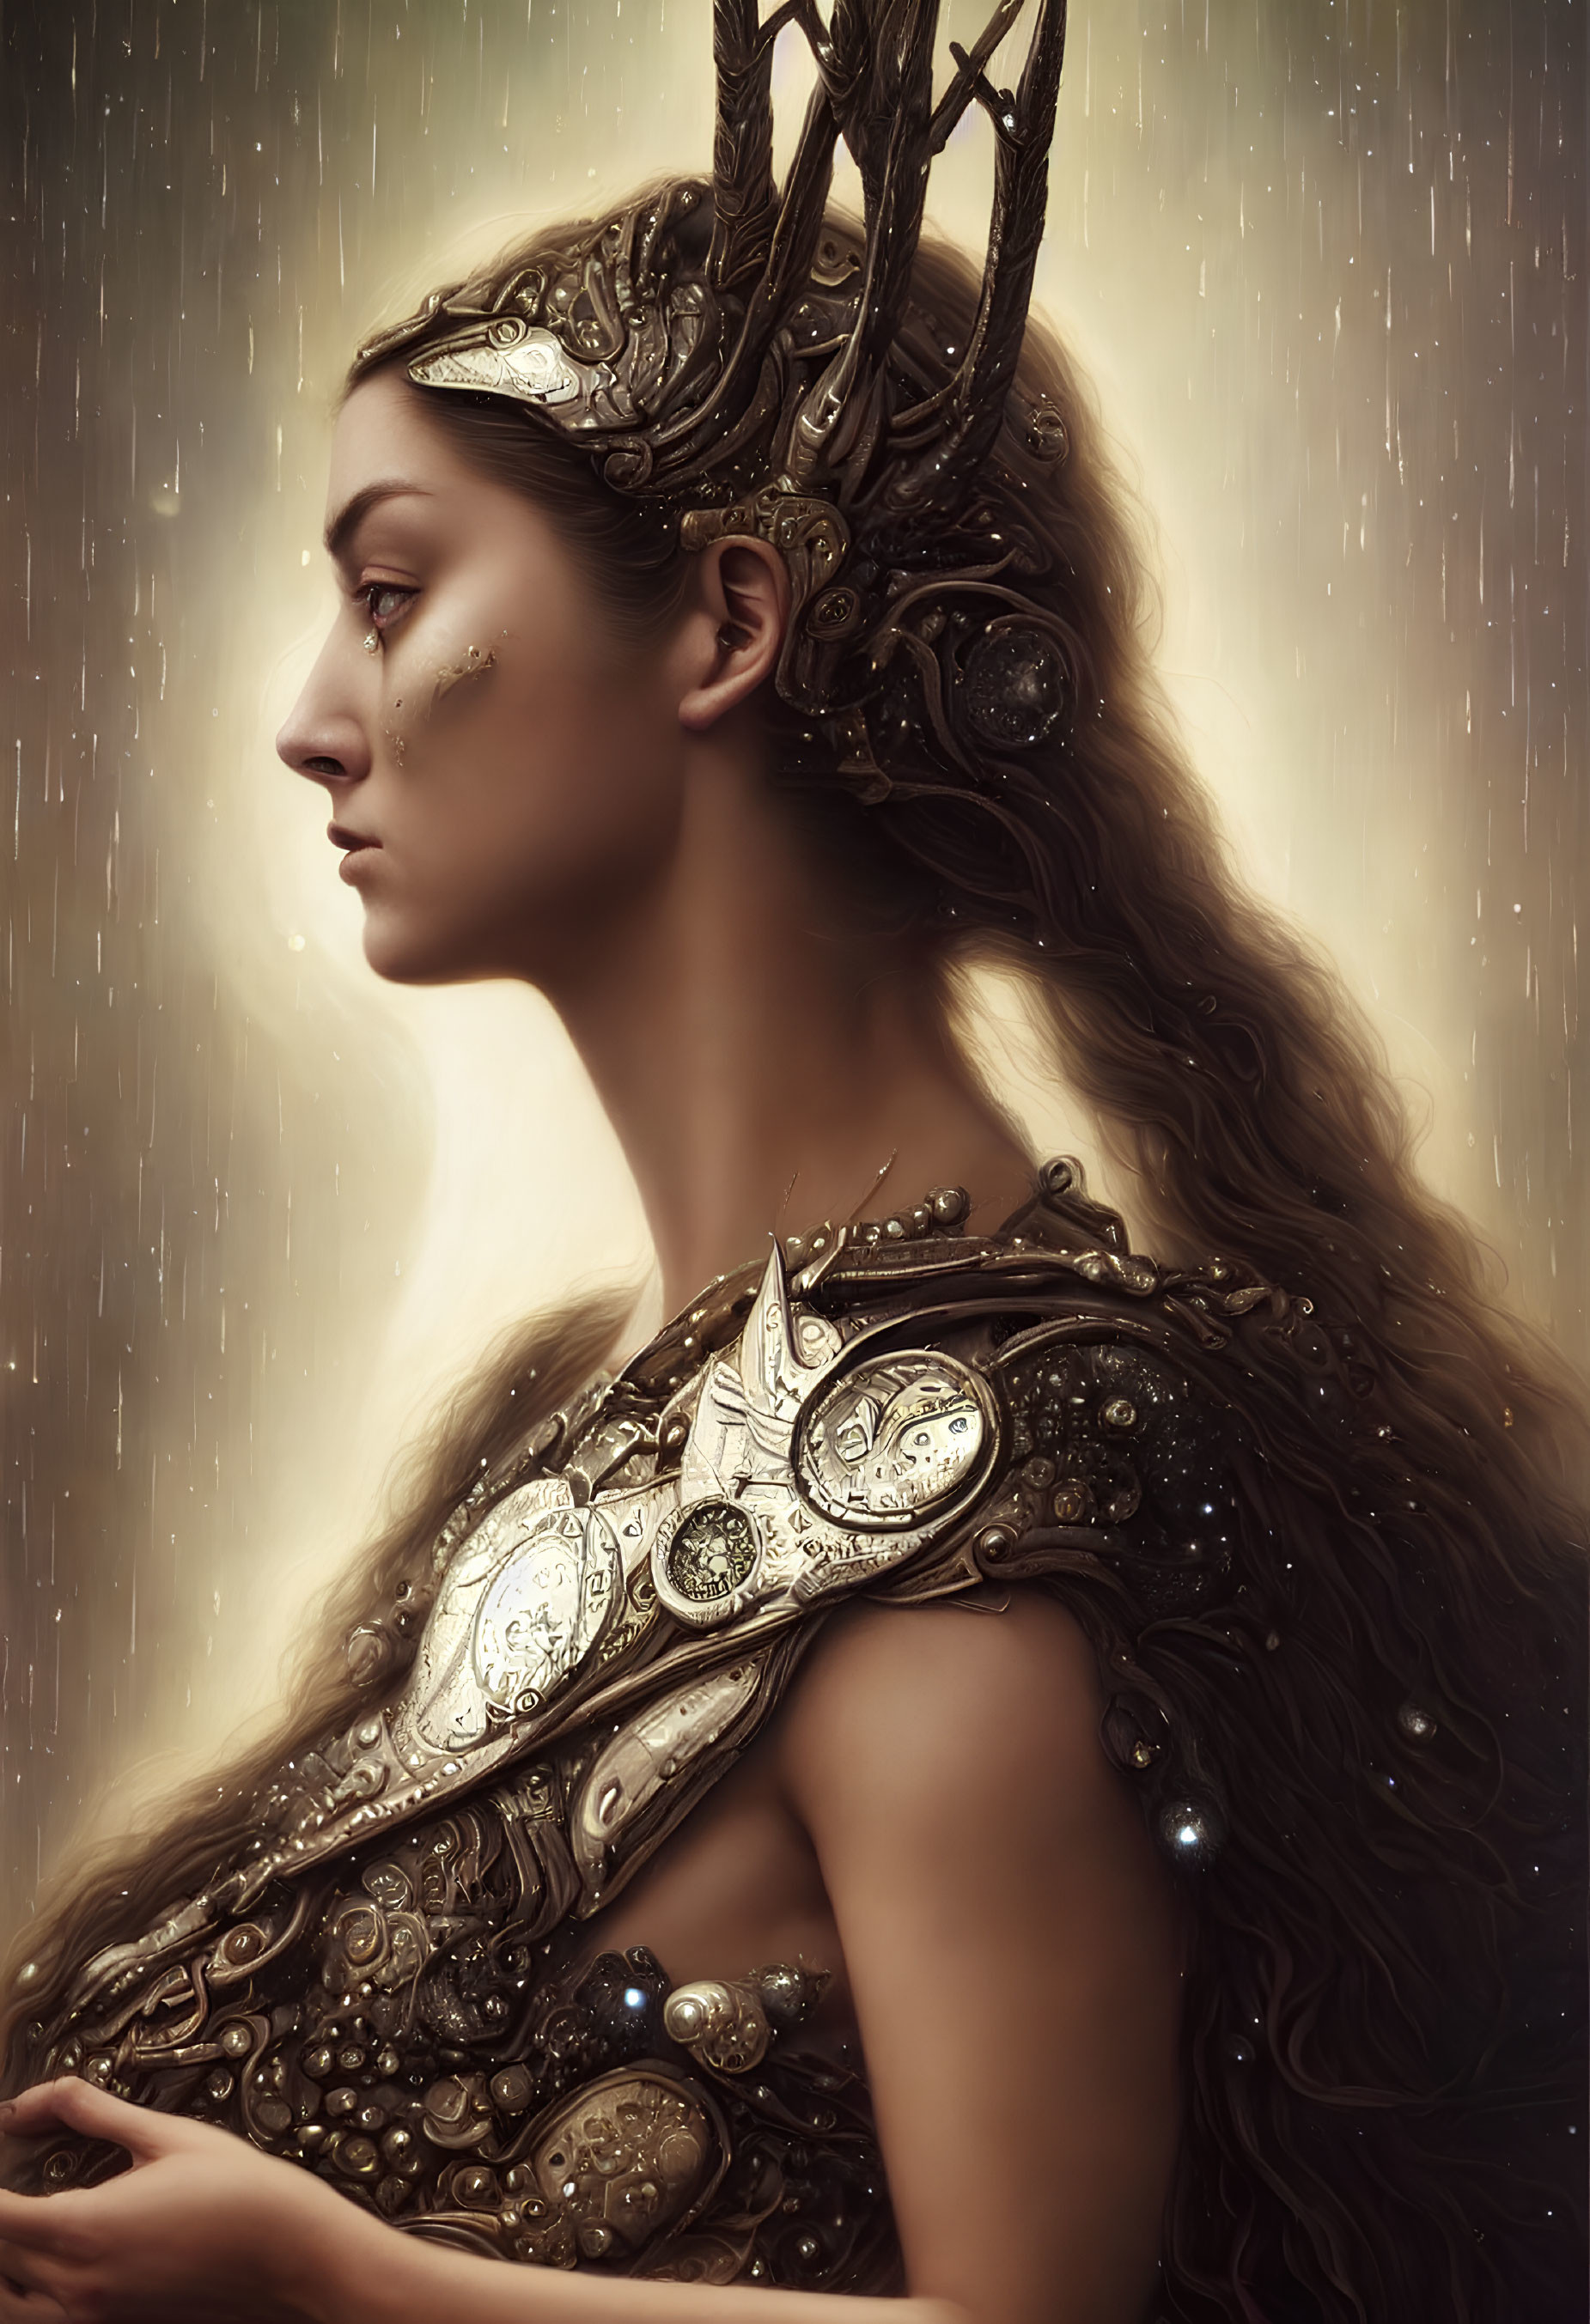 Profile view of woman in ornate metallic headdress and armor against glowing backdrop